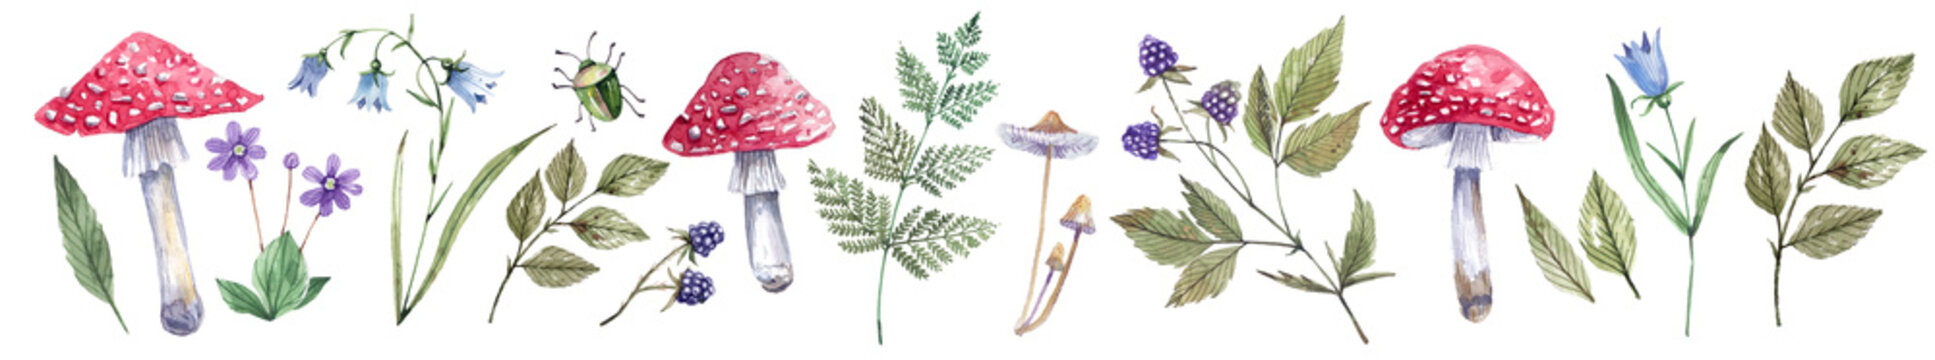 Collection of forest plants, flowers, mushrooms and herbs hand-drawn in watercolor. Bluebells, fly agarics, blackberries watercolor botanical illustration. Isolated on white background 